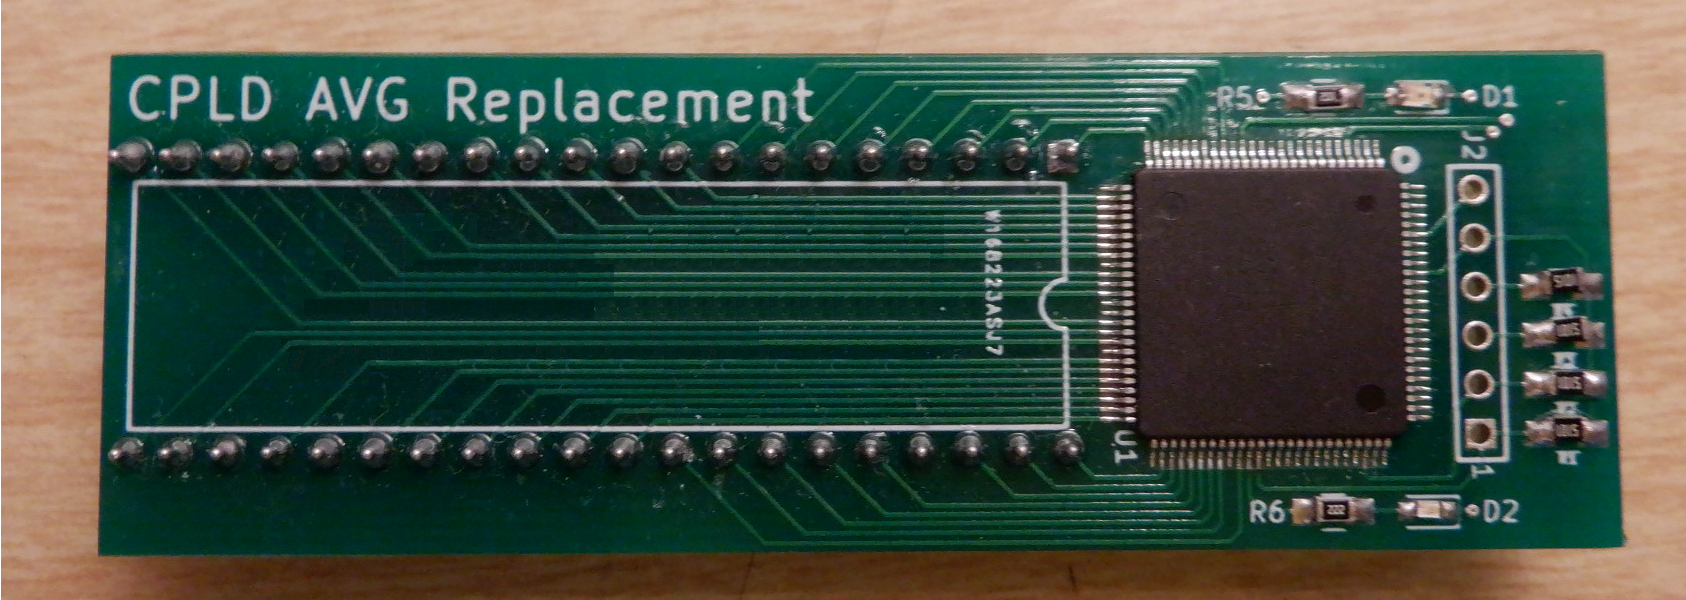 AVG CPLD PCB Top View